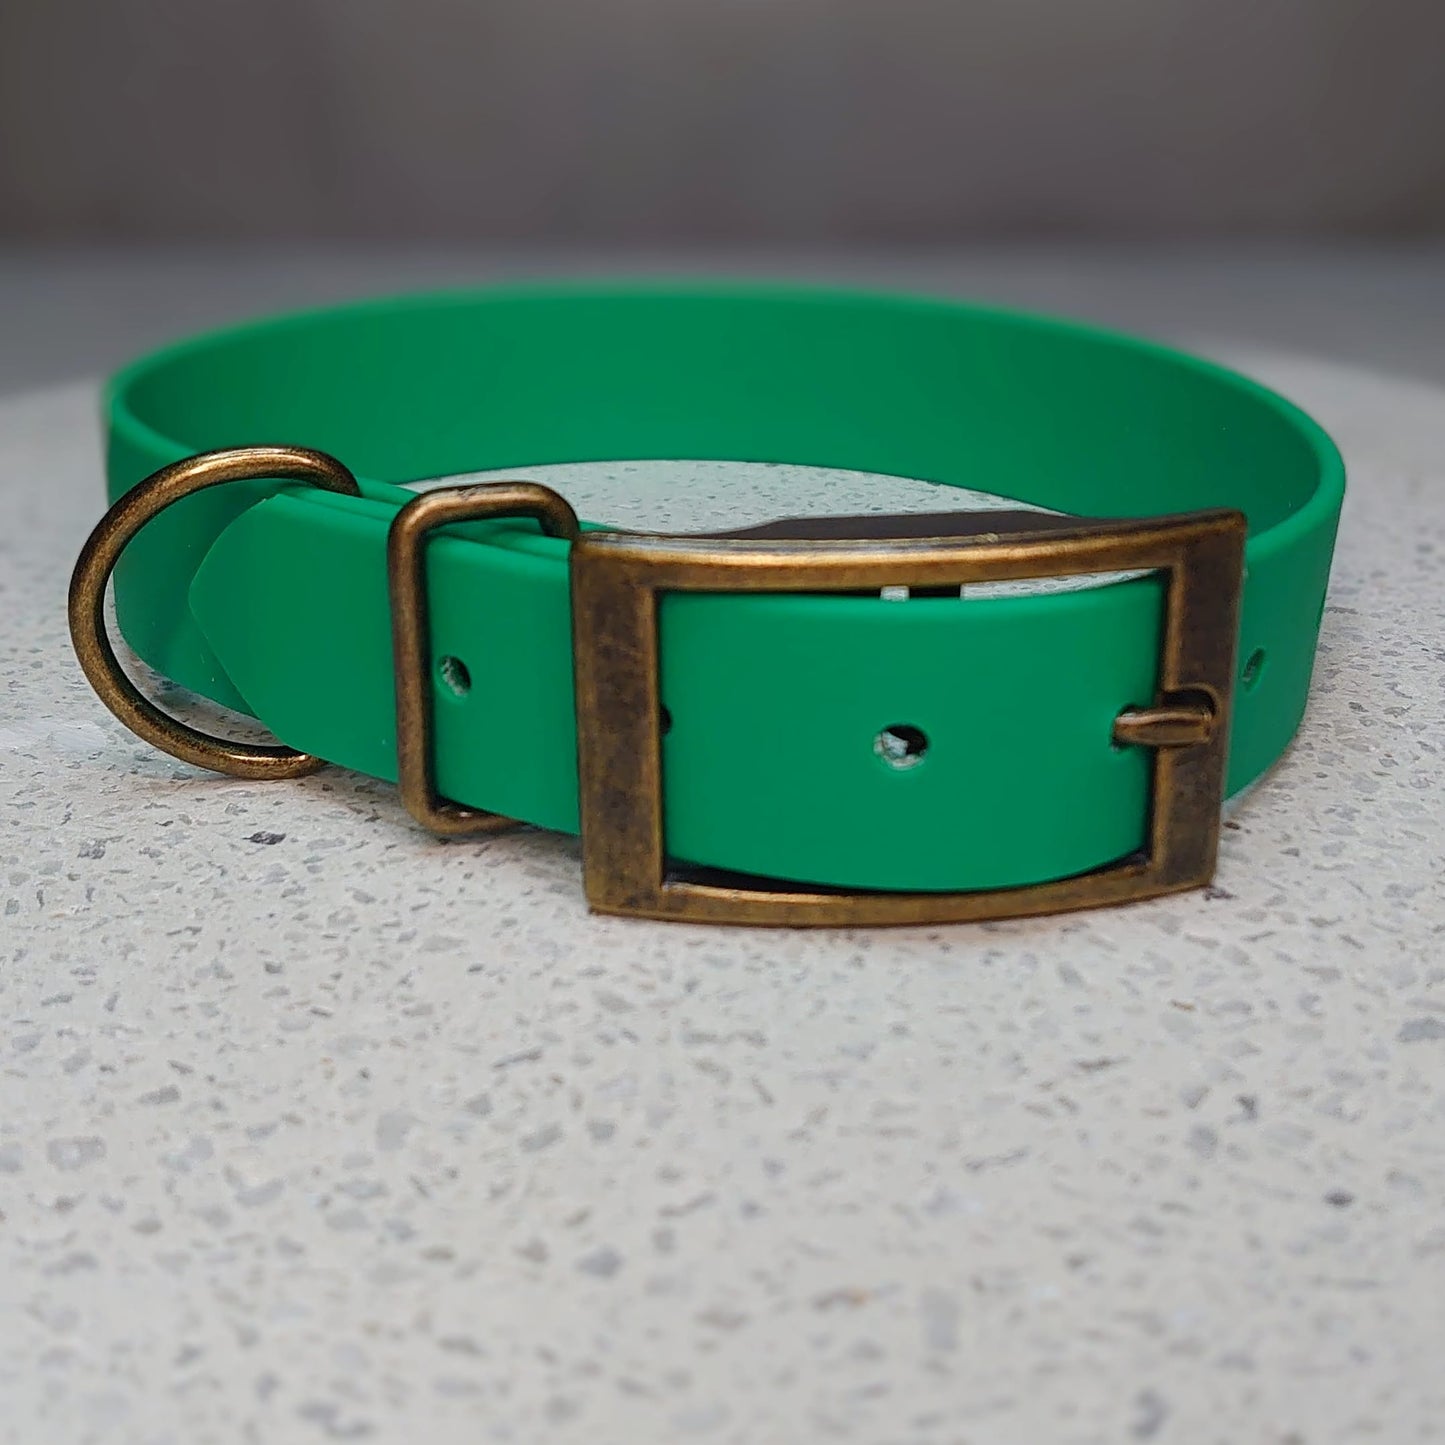 Biothane collar with buckle - Design your own